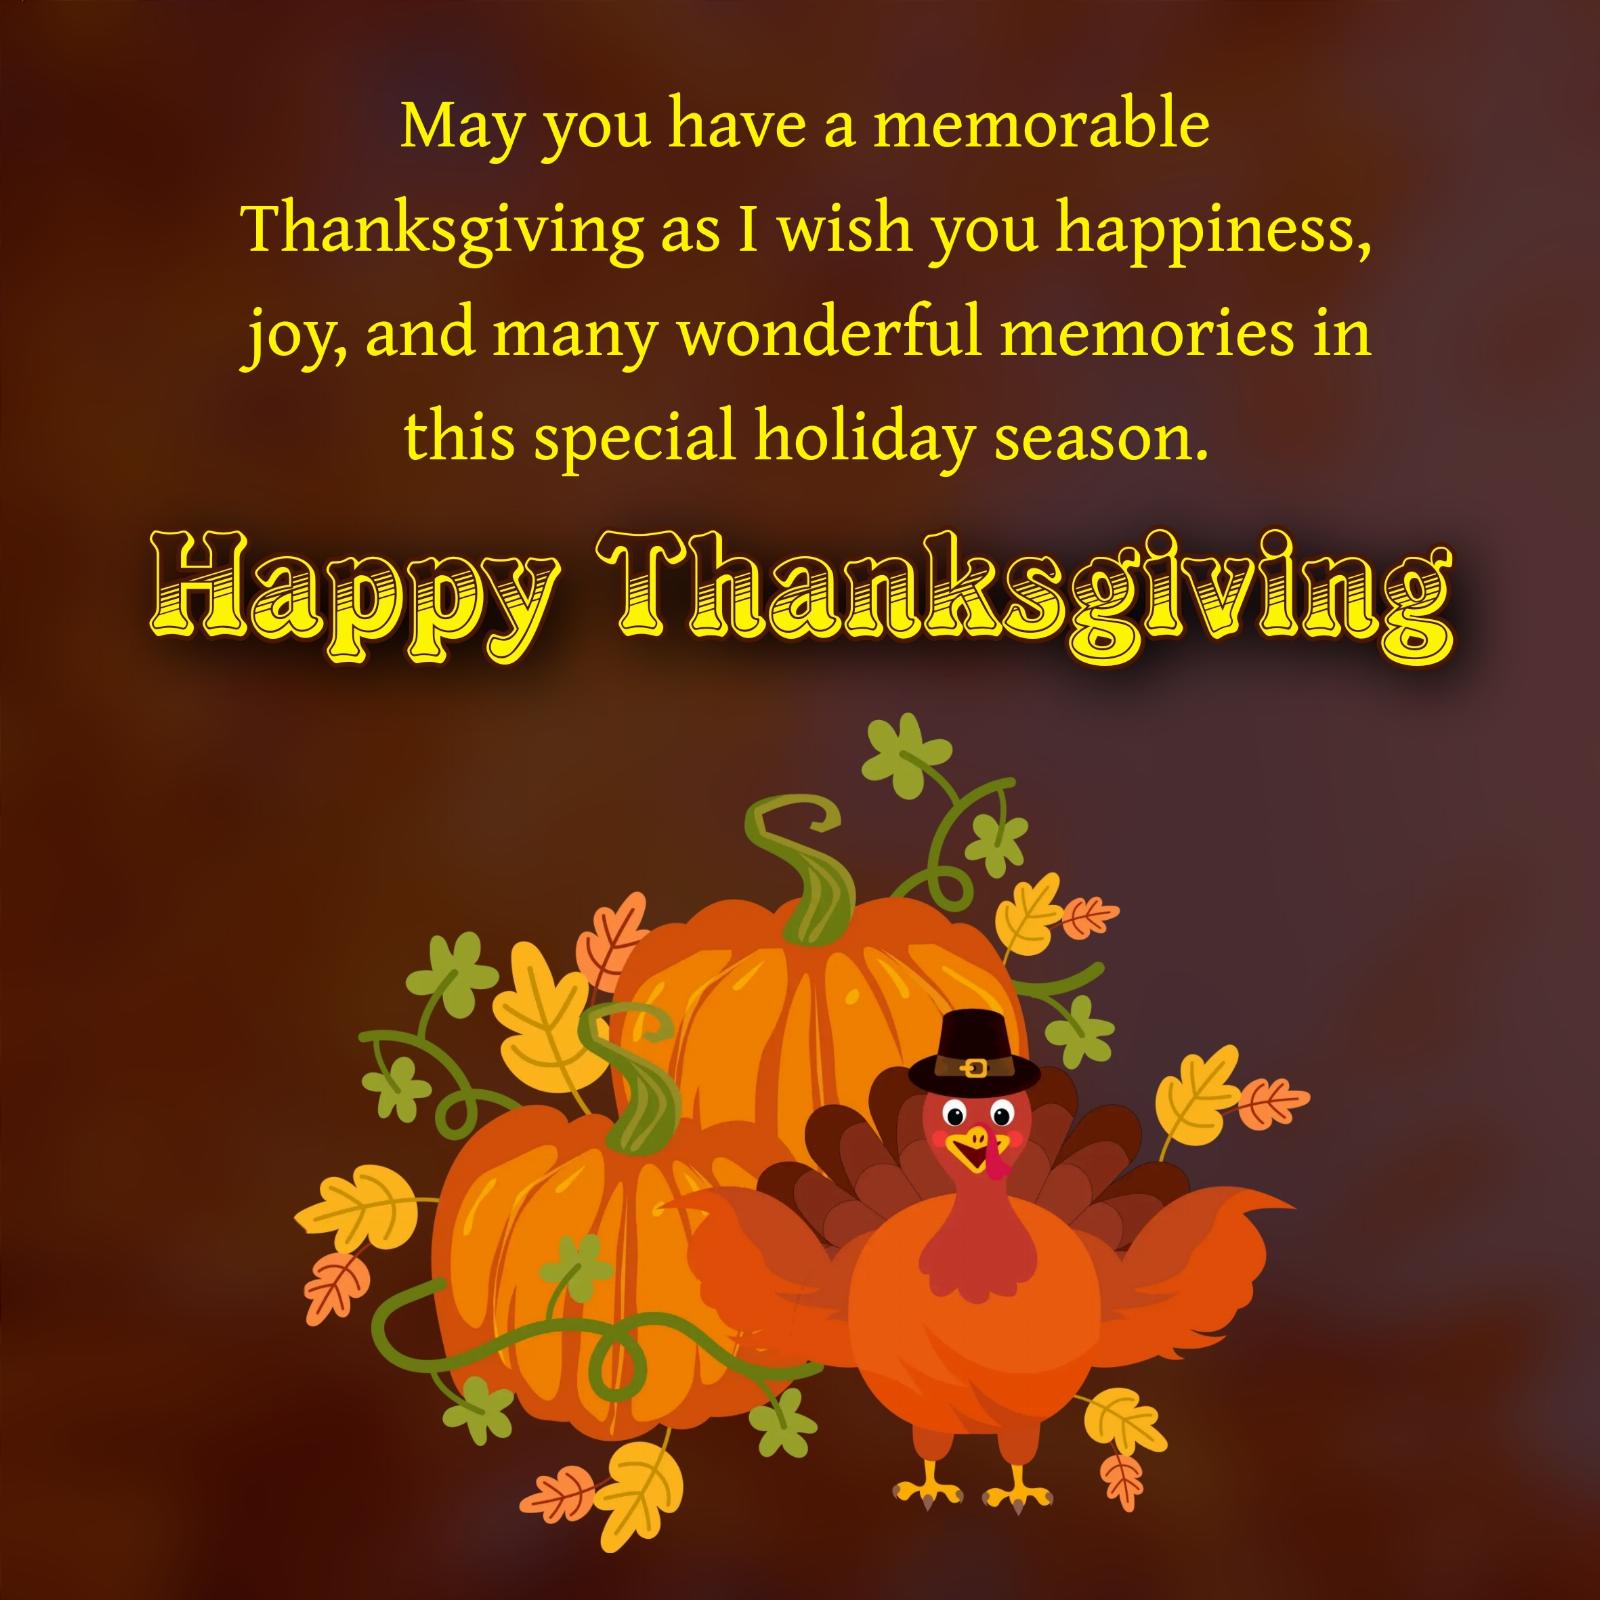 May you have a memorable Thanksgiving as I wish you happiness